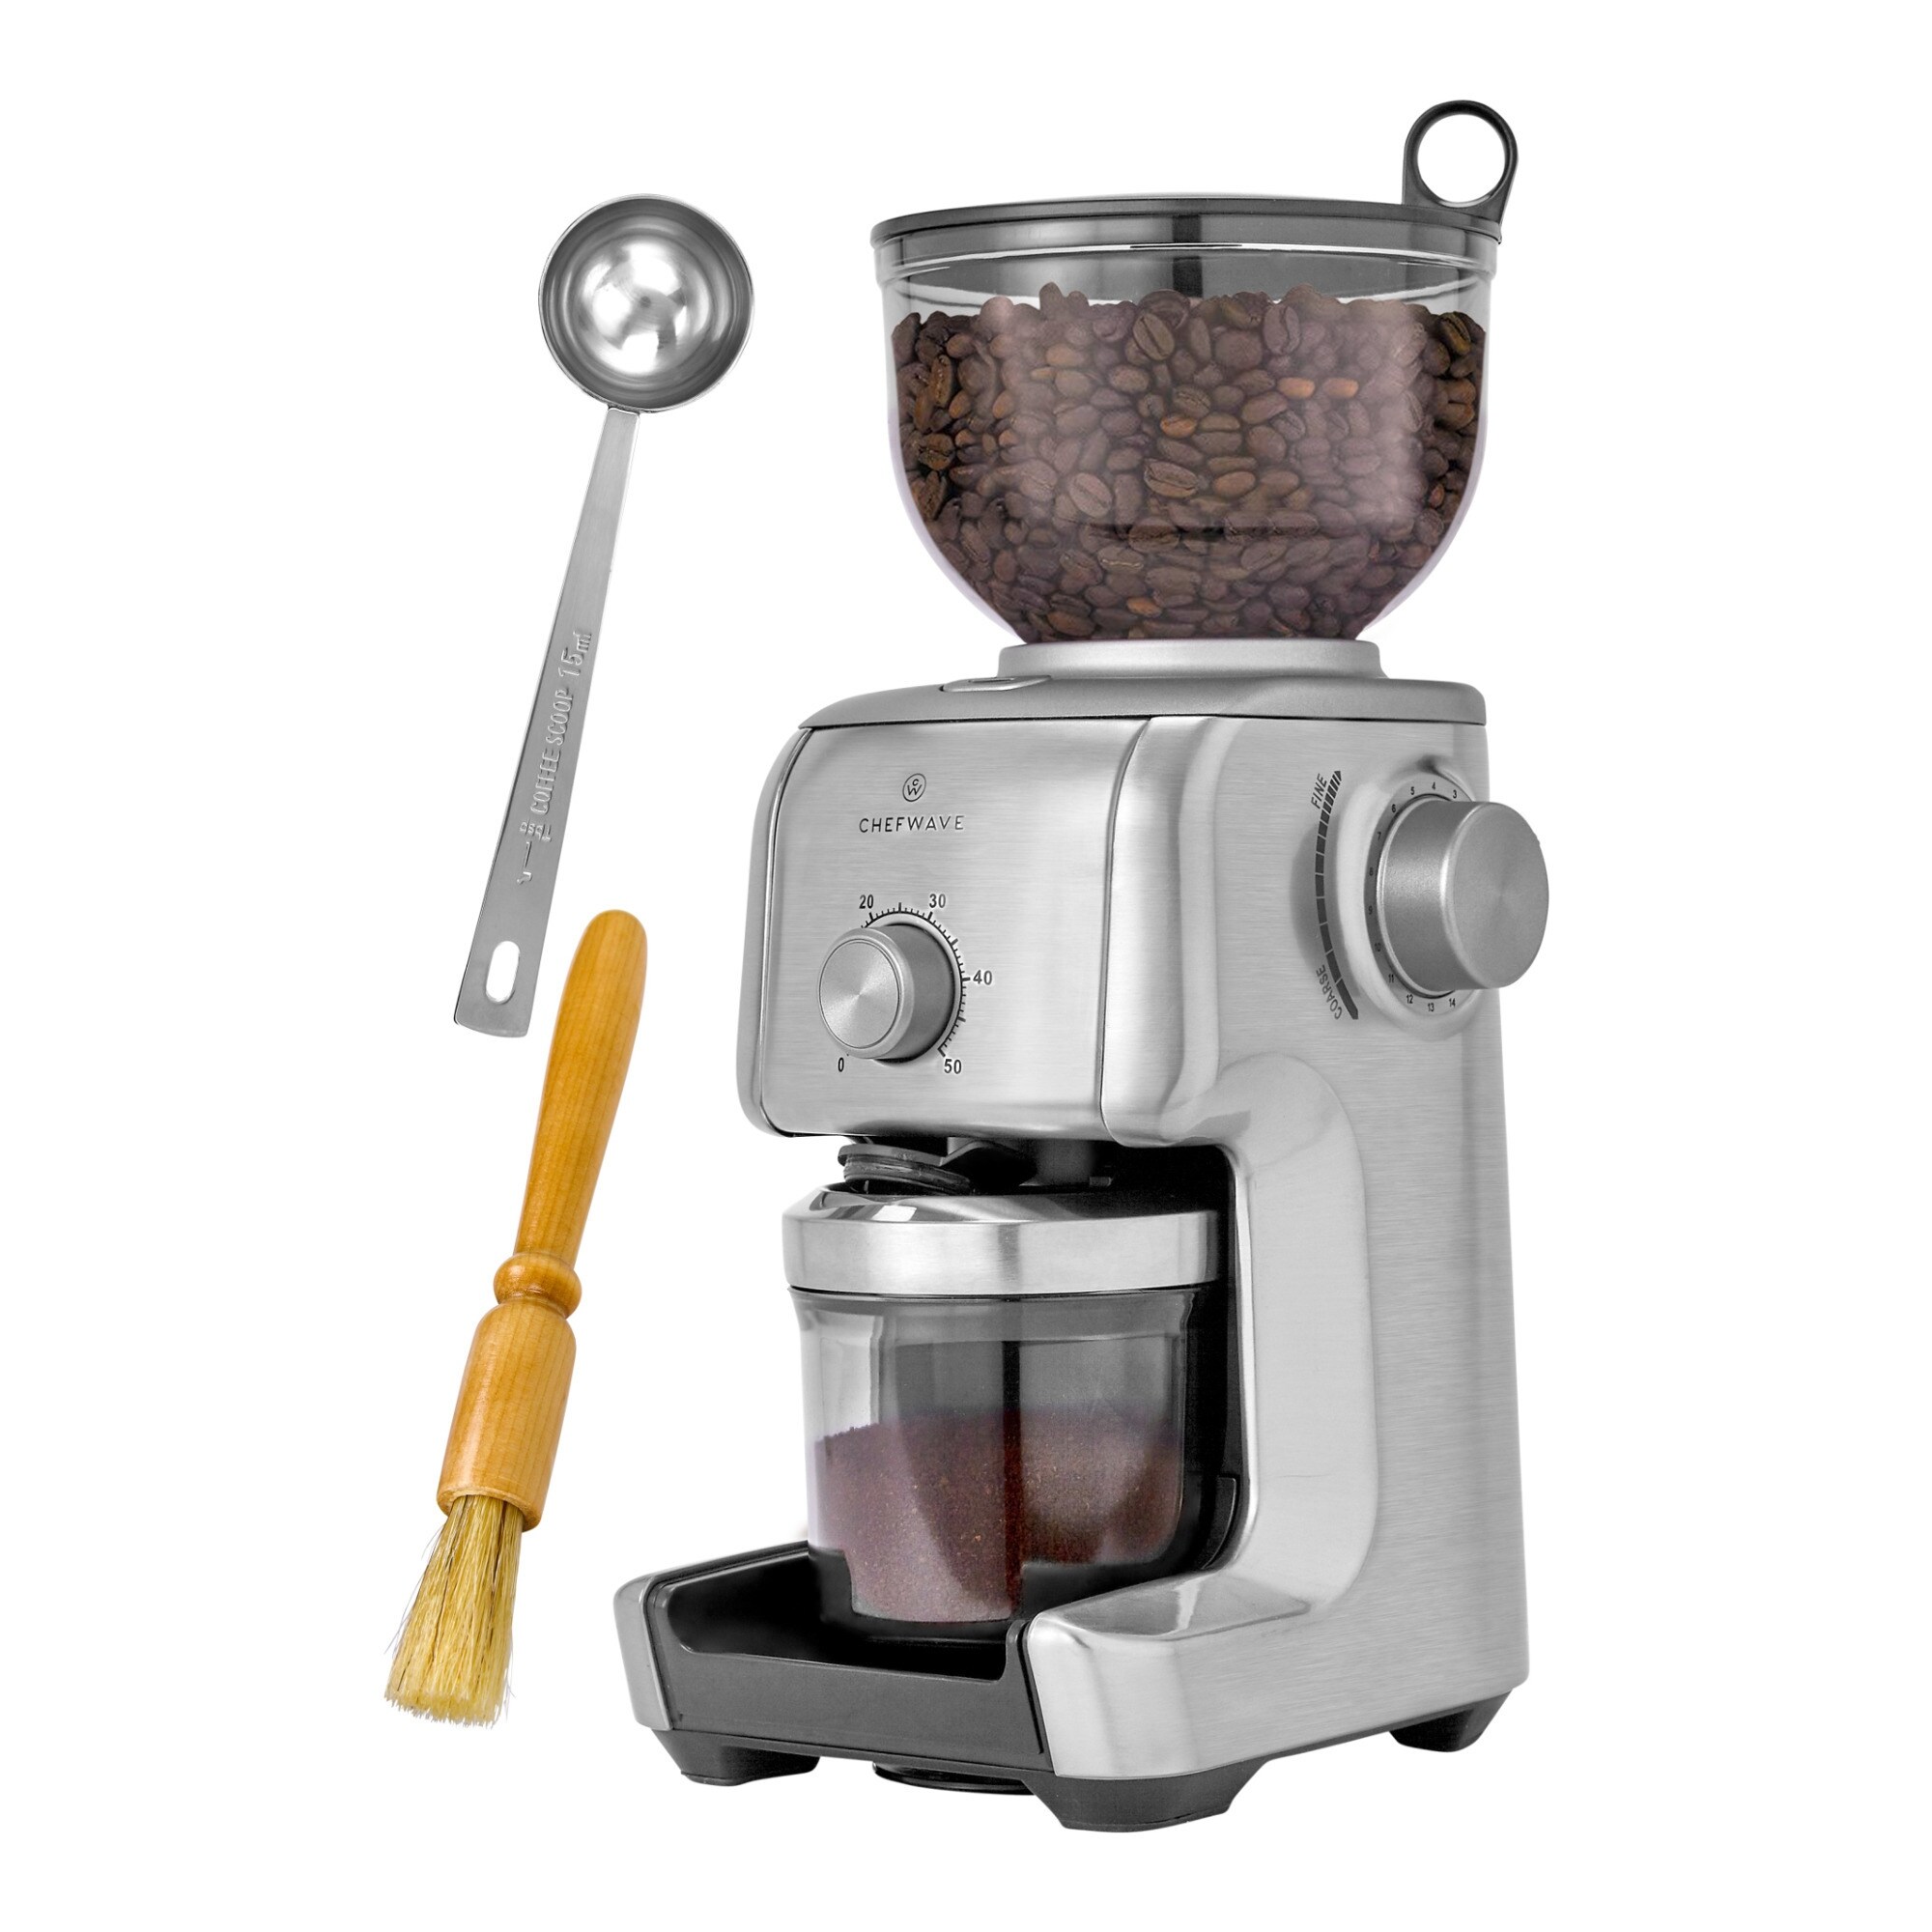 https://ak1.ostkcdn.com/images/products/is/images/direct/e3ade565b41abf47b1b051a36934719aca92a2bd/ChefWave-Bonne-Conical-Burr-Coffee-Grinder-with-16-Grind-Settings.jpg